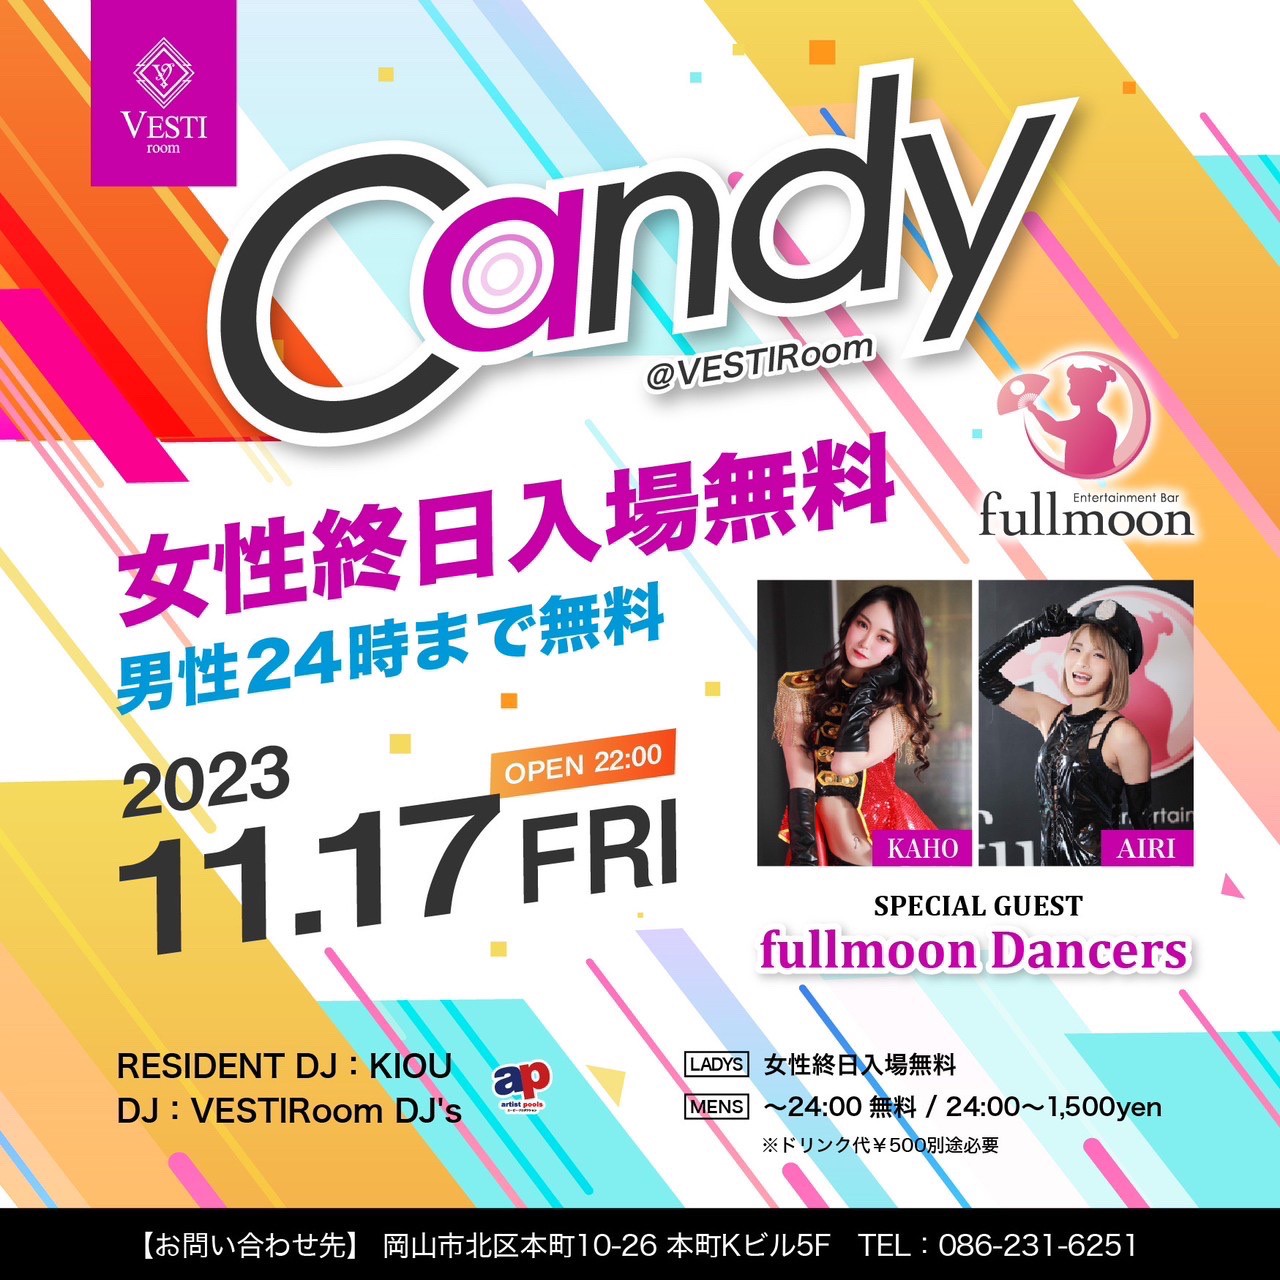 【Candy】SPECIAL GUEST : fullmoon Dancers ～女性終日入場無料～